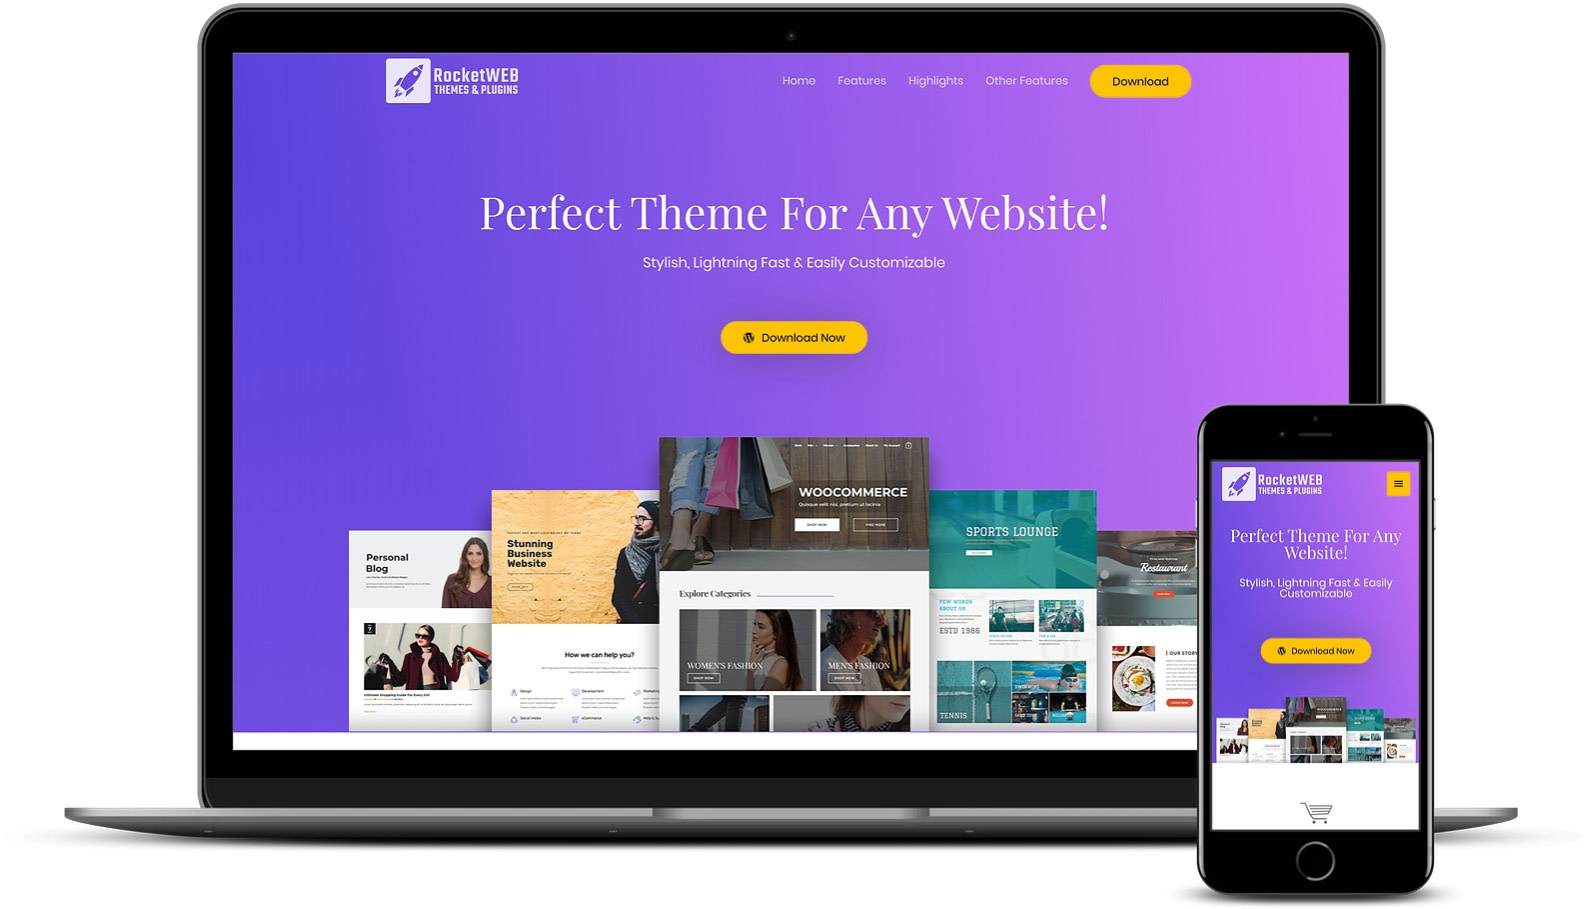 Astra is one of the fastest WordPress themes on desktop and mobile